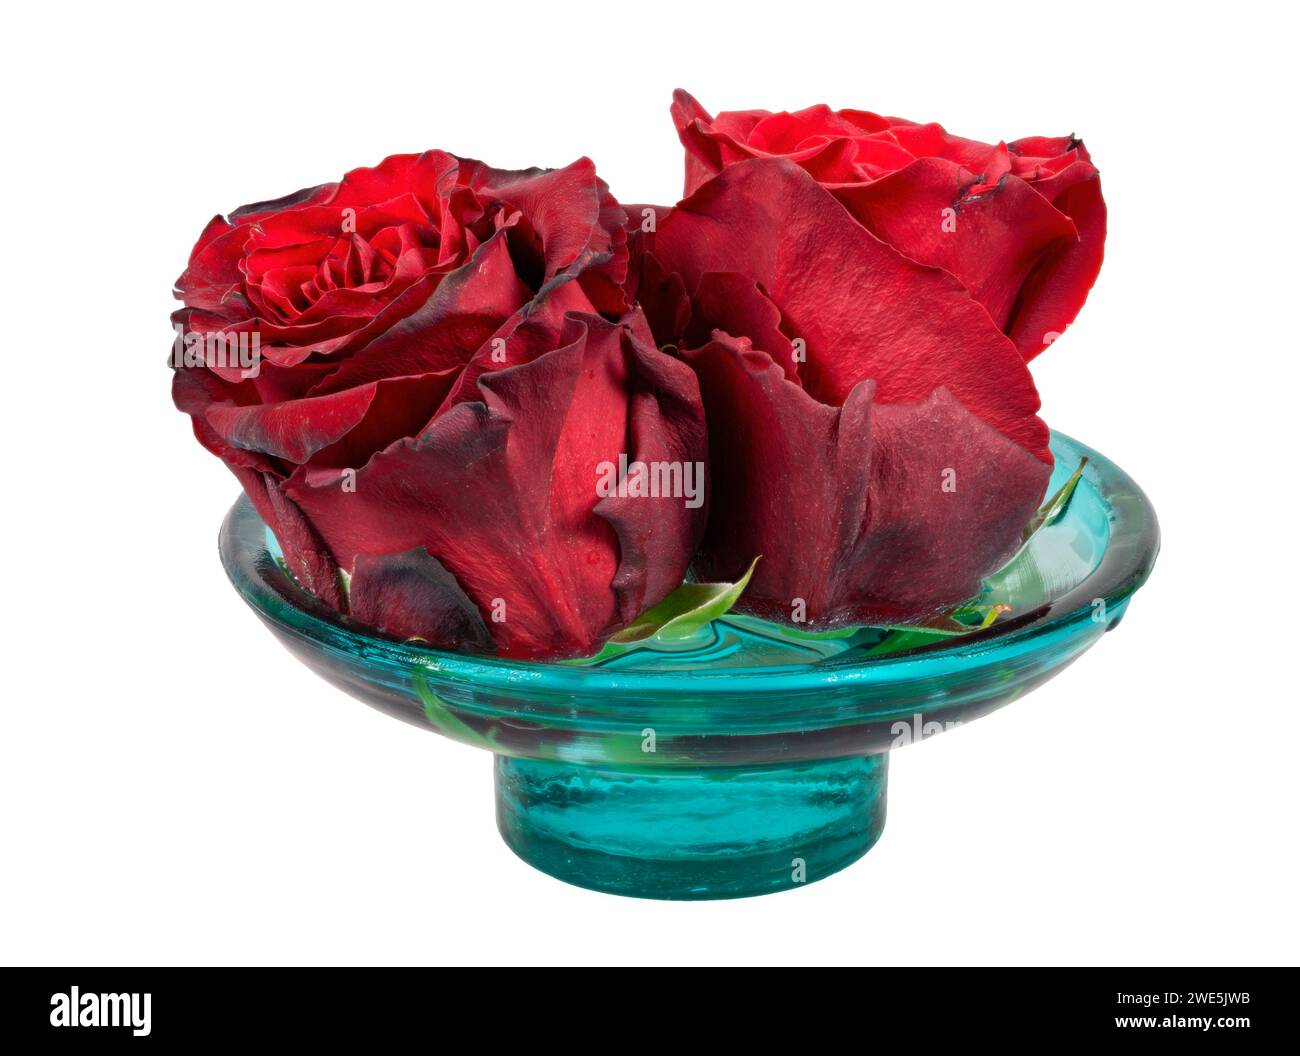 Isolated withered red rose blossoms in a glass bowl Stock Photo